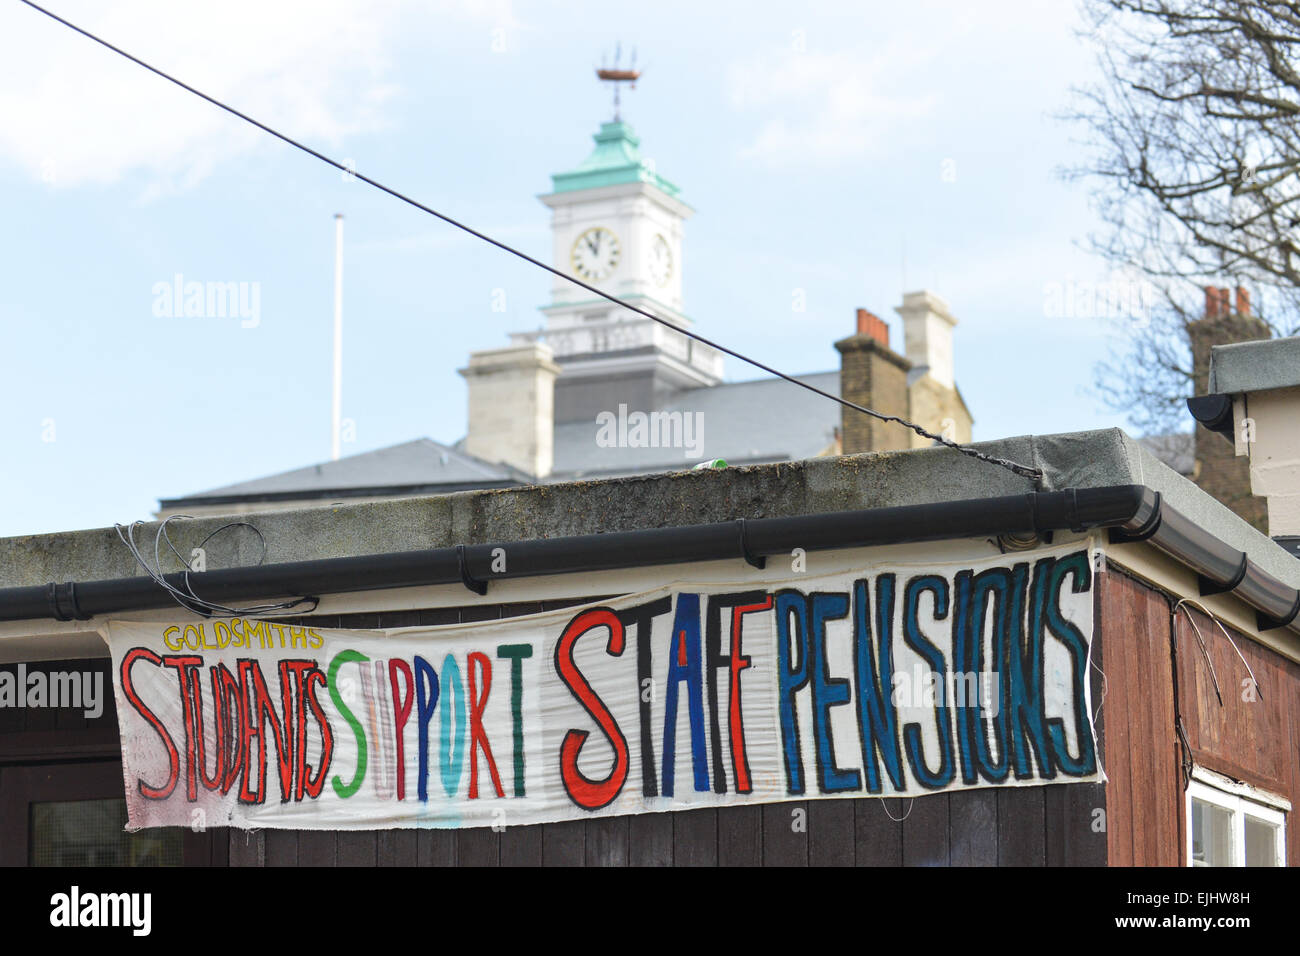 New Cross Gate, London, UK. 27th March 2015. Students are occupying Deptford Town Hall, the management building for Goldsmiths College. Part of the growing Occupy movement against cuts in education that began with the Occupy UAL at St Martins. Credit:  Matthew Chattle/Alamy Live News Stock Photo